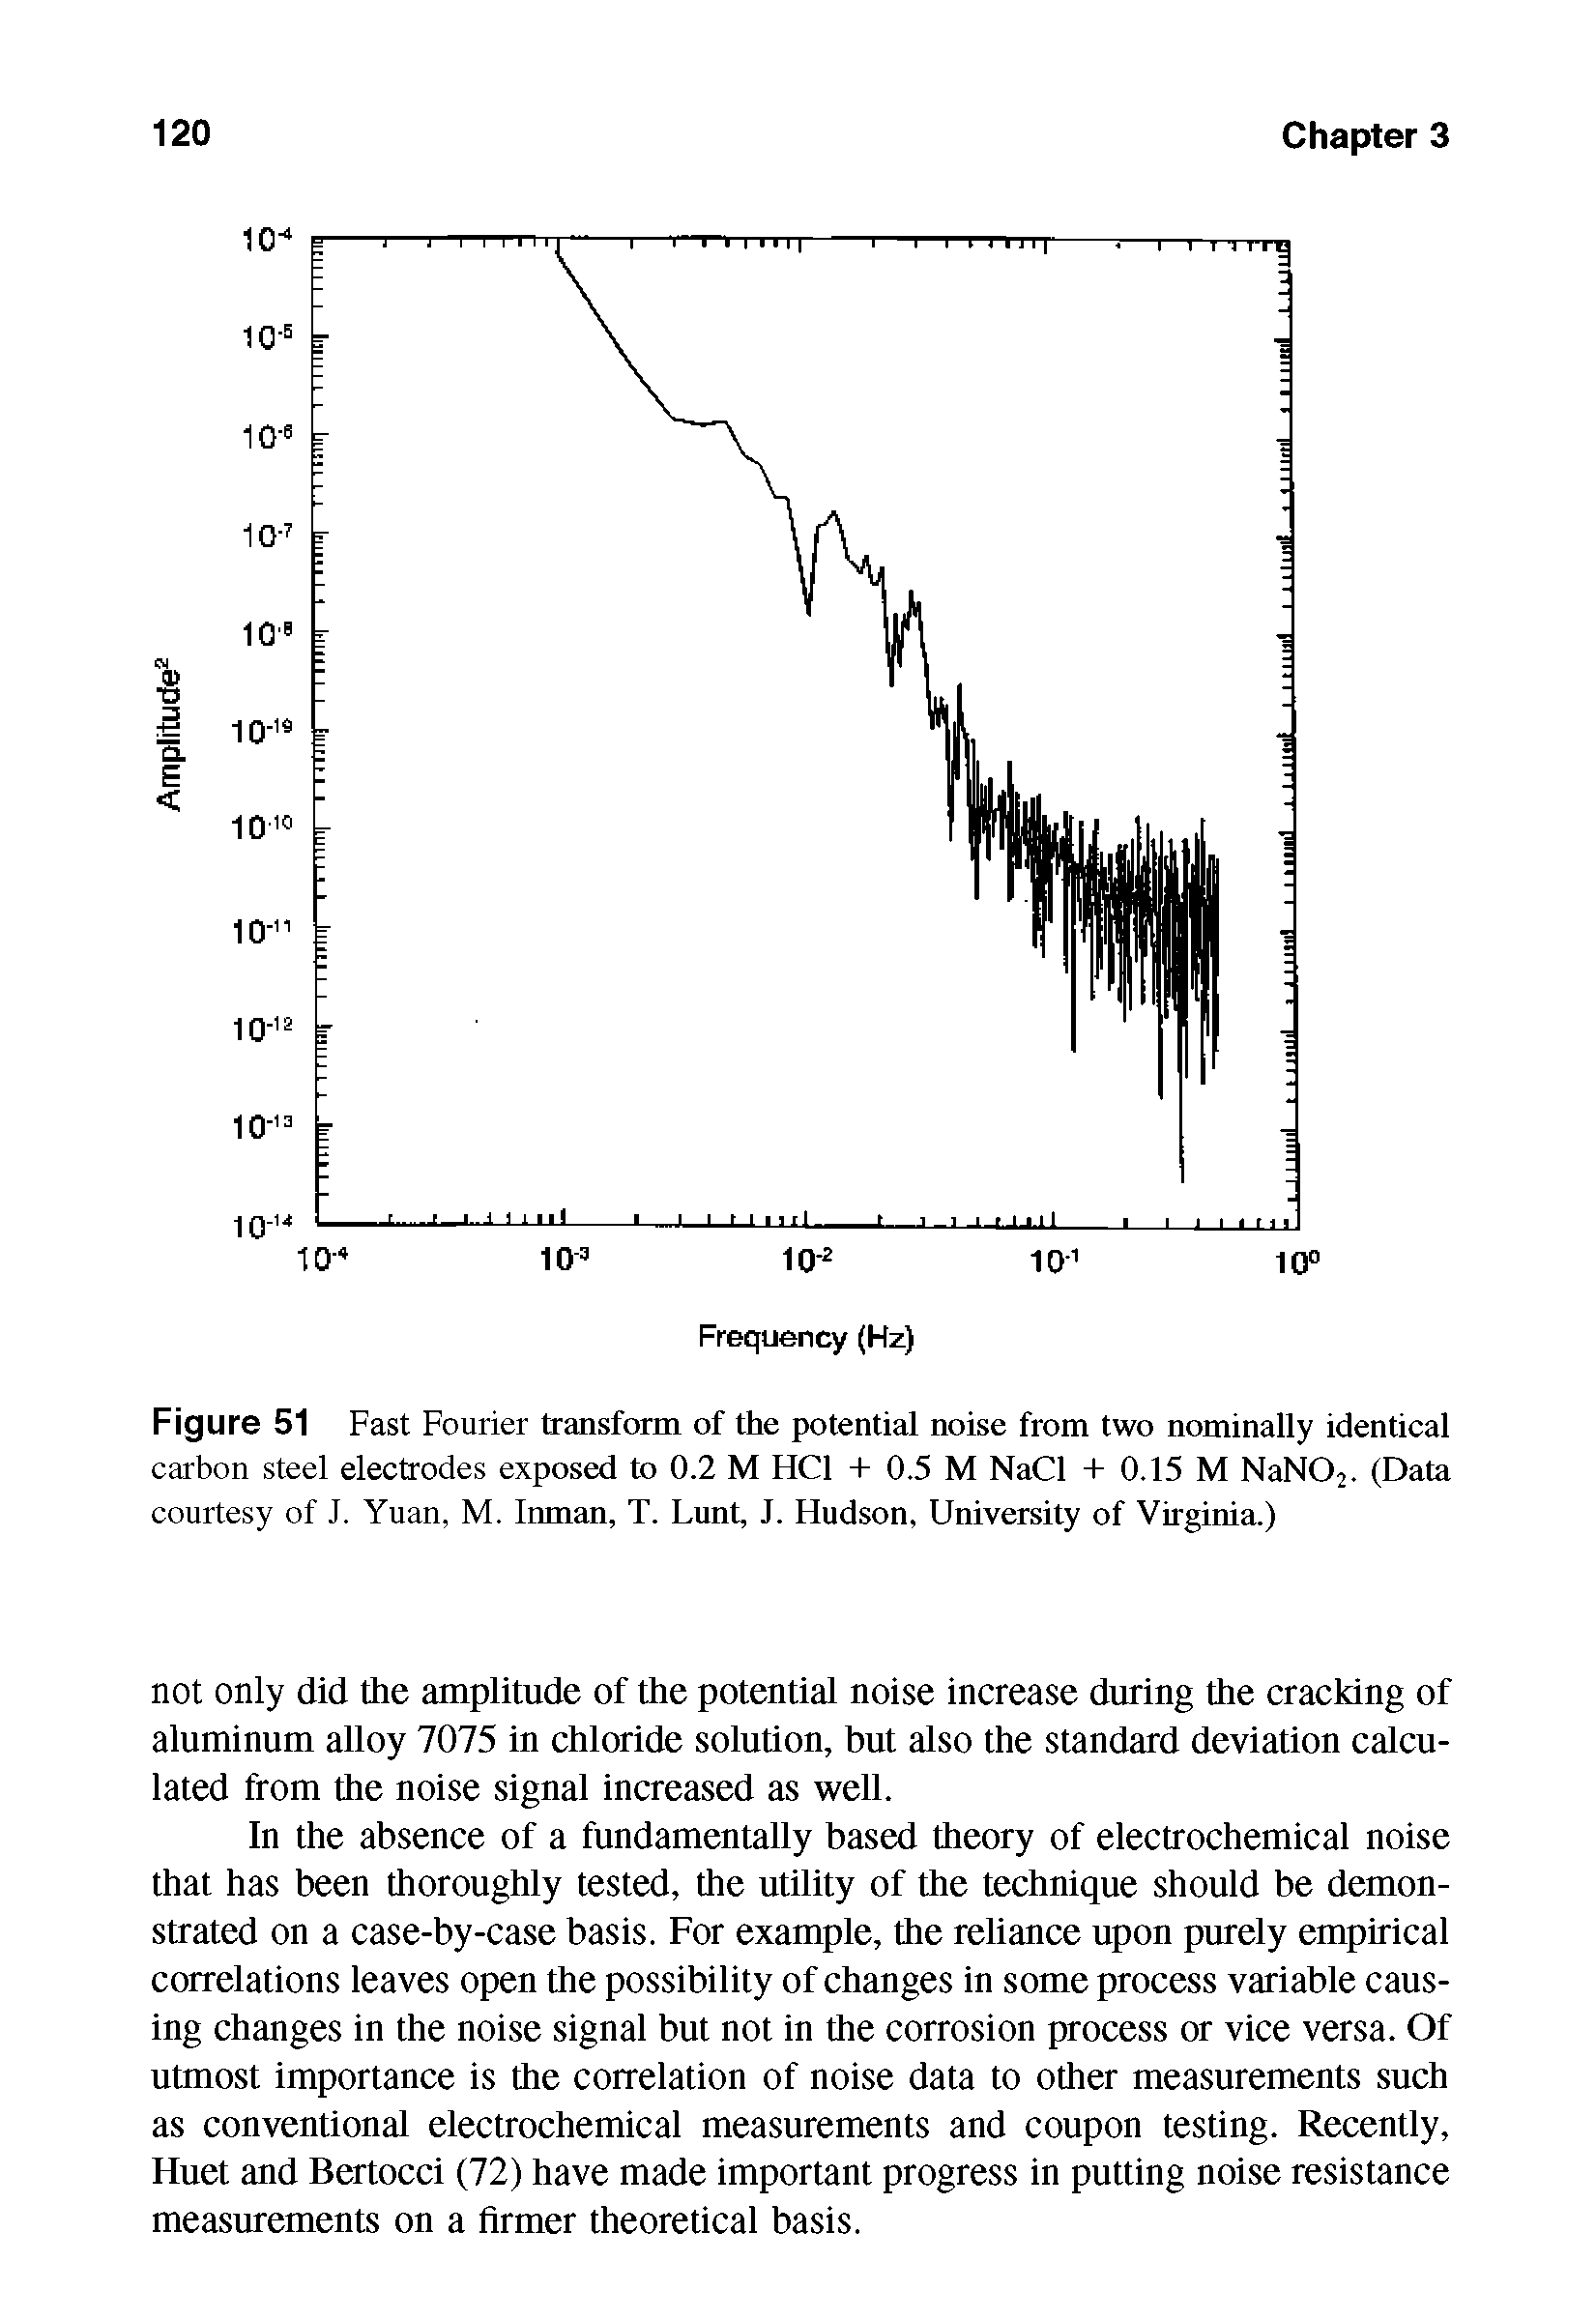 Figure 51 Fast Fourier transform of the potential noise from two nominally identical carbon steel electrodes exposed to 0.2 M HC1 + 0.5 M NaCl + 0.15 M NaN02. (Data courtesy of J. Yuan, M. Inman, T. Lunt, J. Hudson, University of Virginia.)...